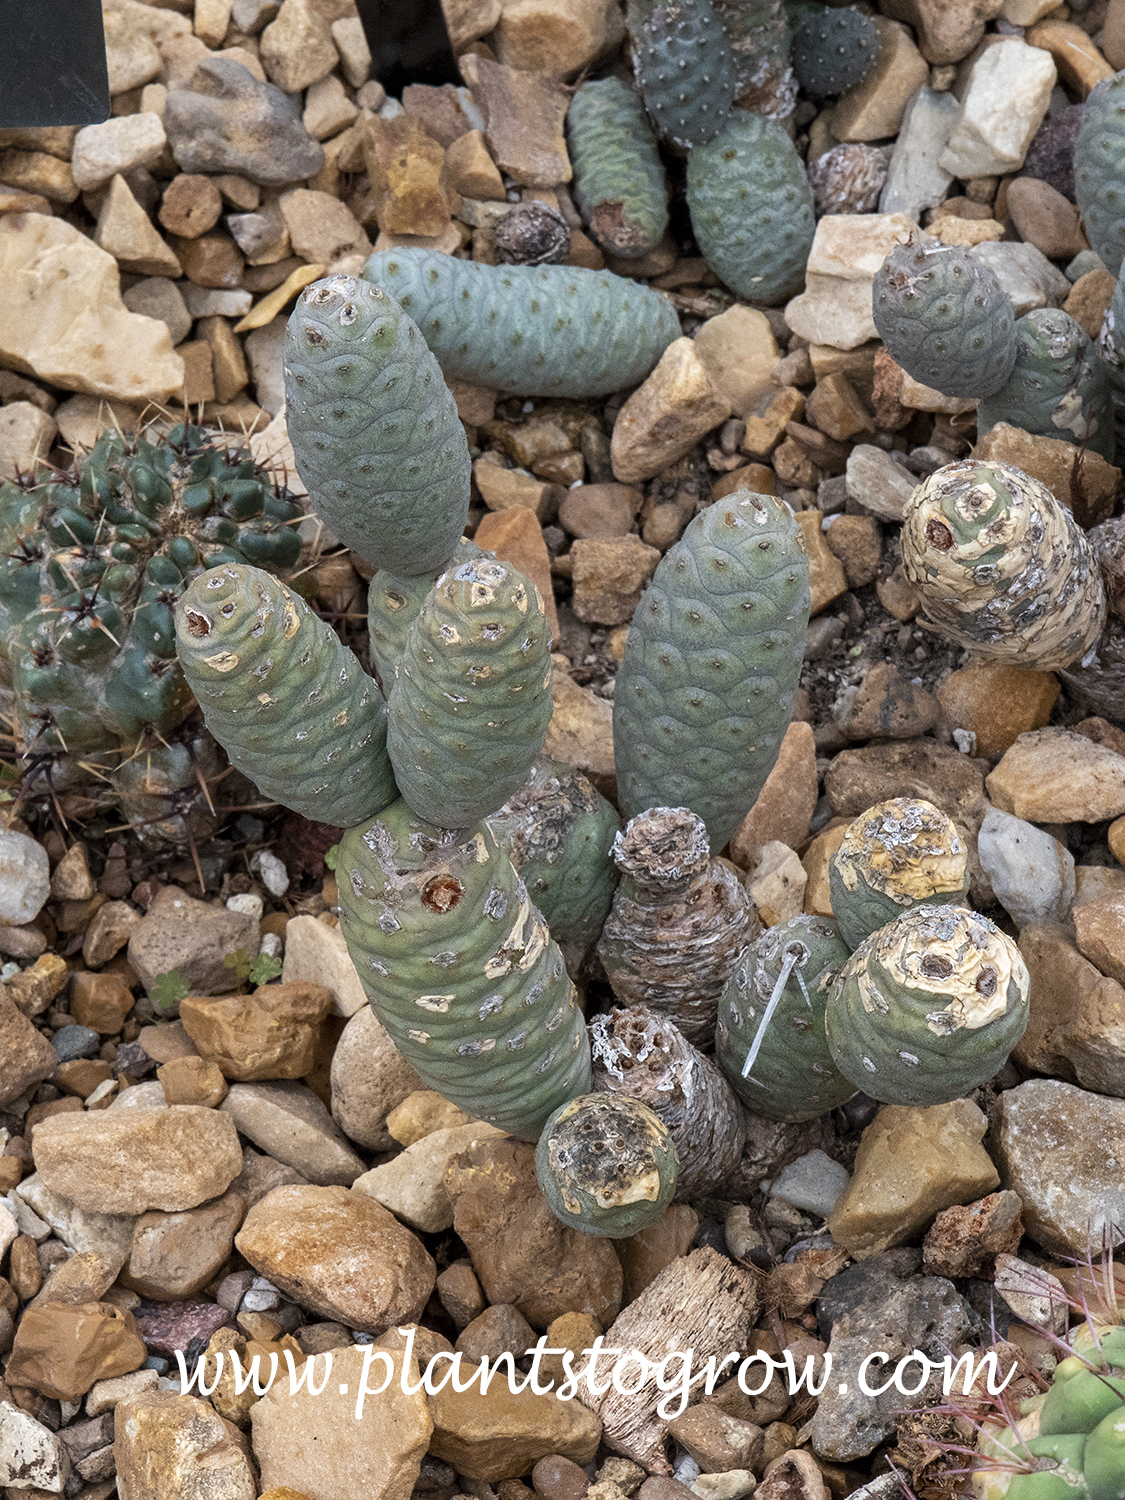 Pine Cone Cactus (Tephrocactus articulatus) 
The oblong sausage like cylindrical stem sections will detach, fall to the ground and root.